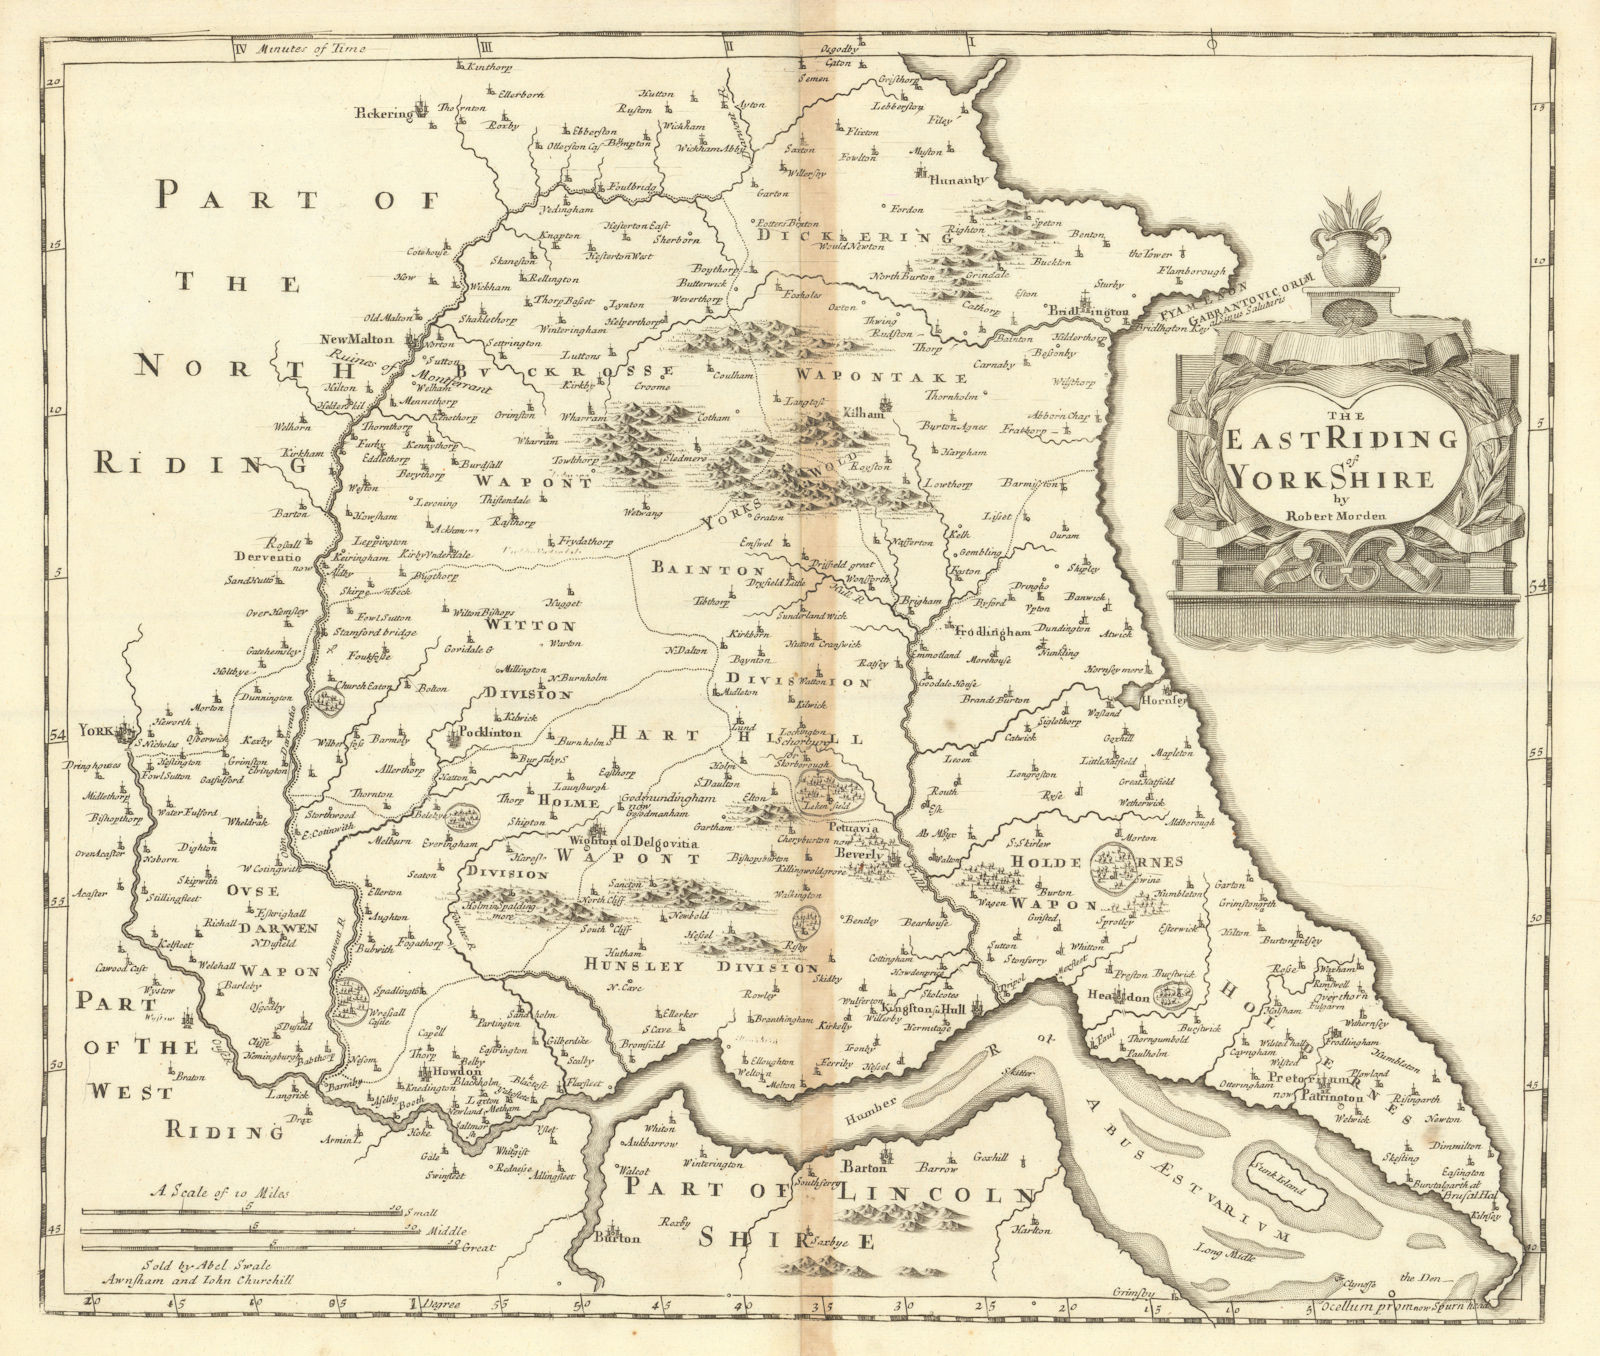 EAST RIDING OF YORKSHIRE by ROBERT MORDEN from Camden's Britannia 1695 old map